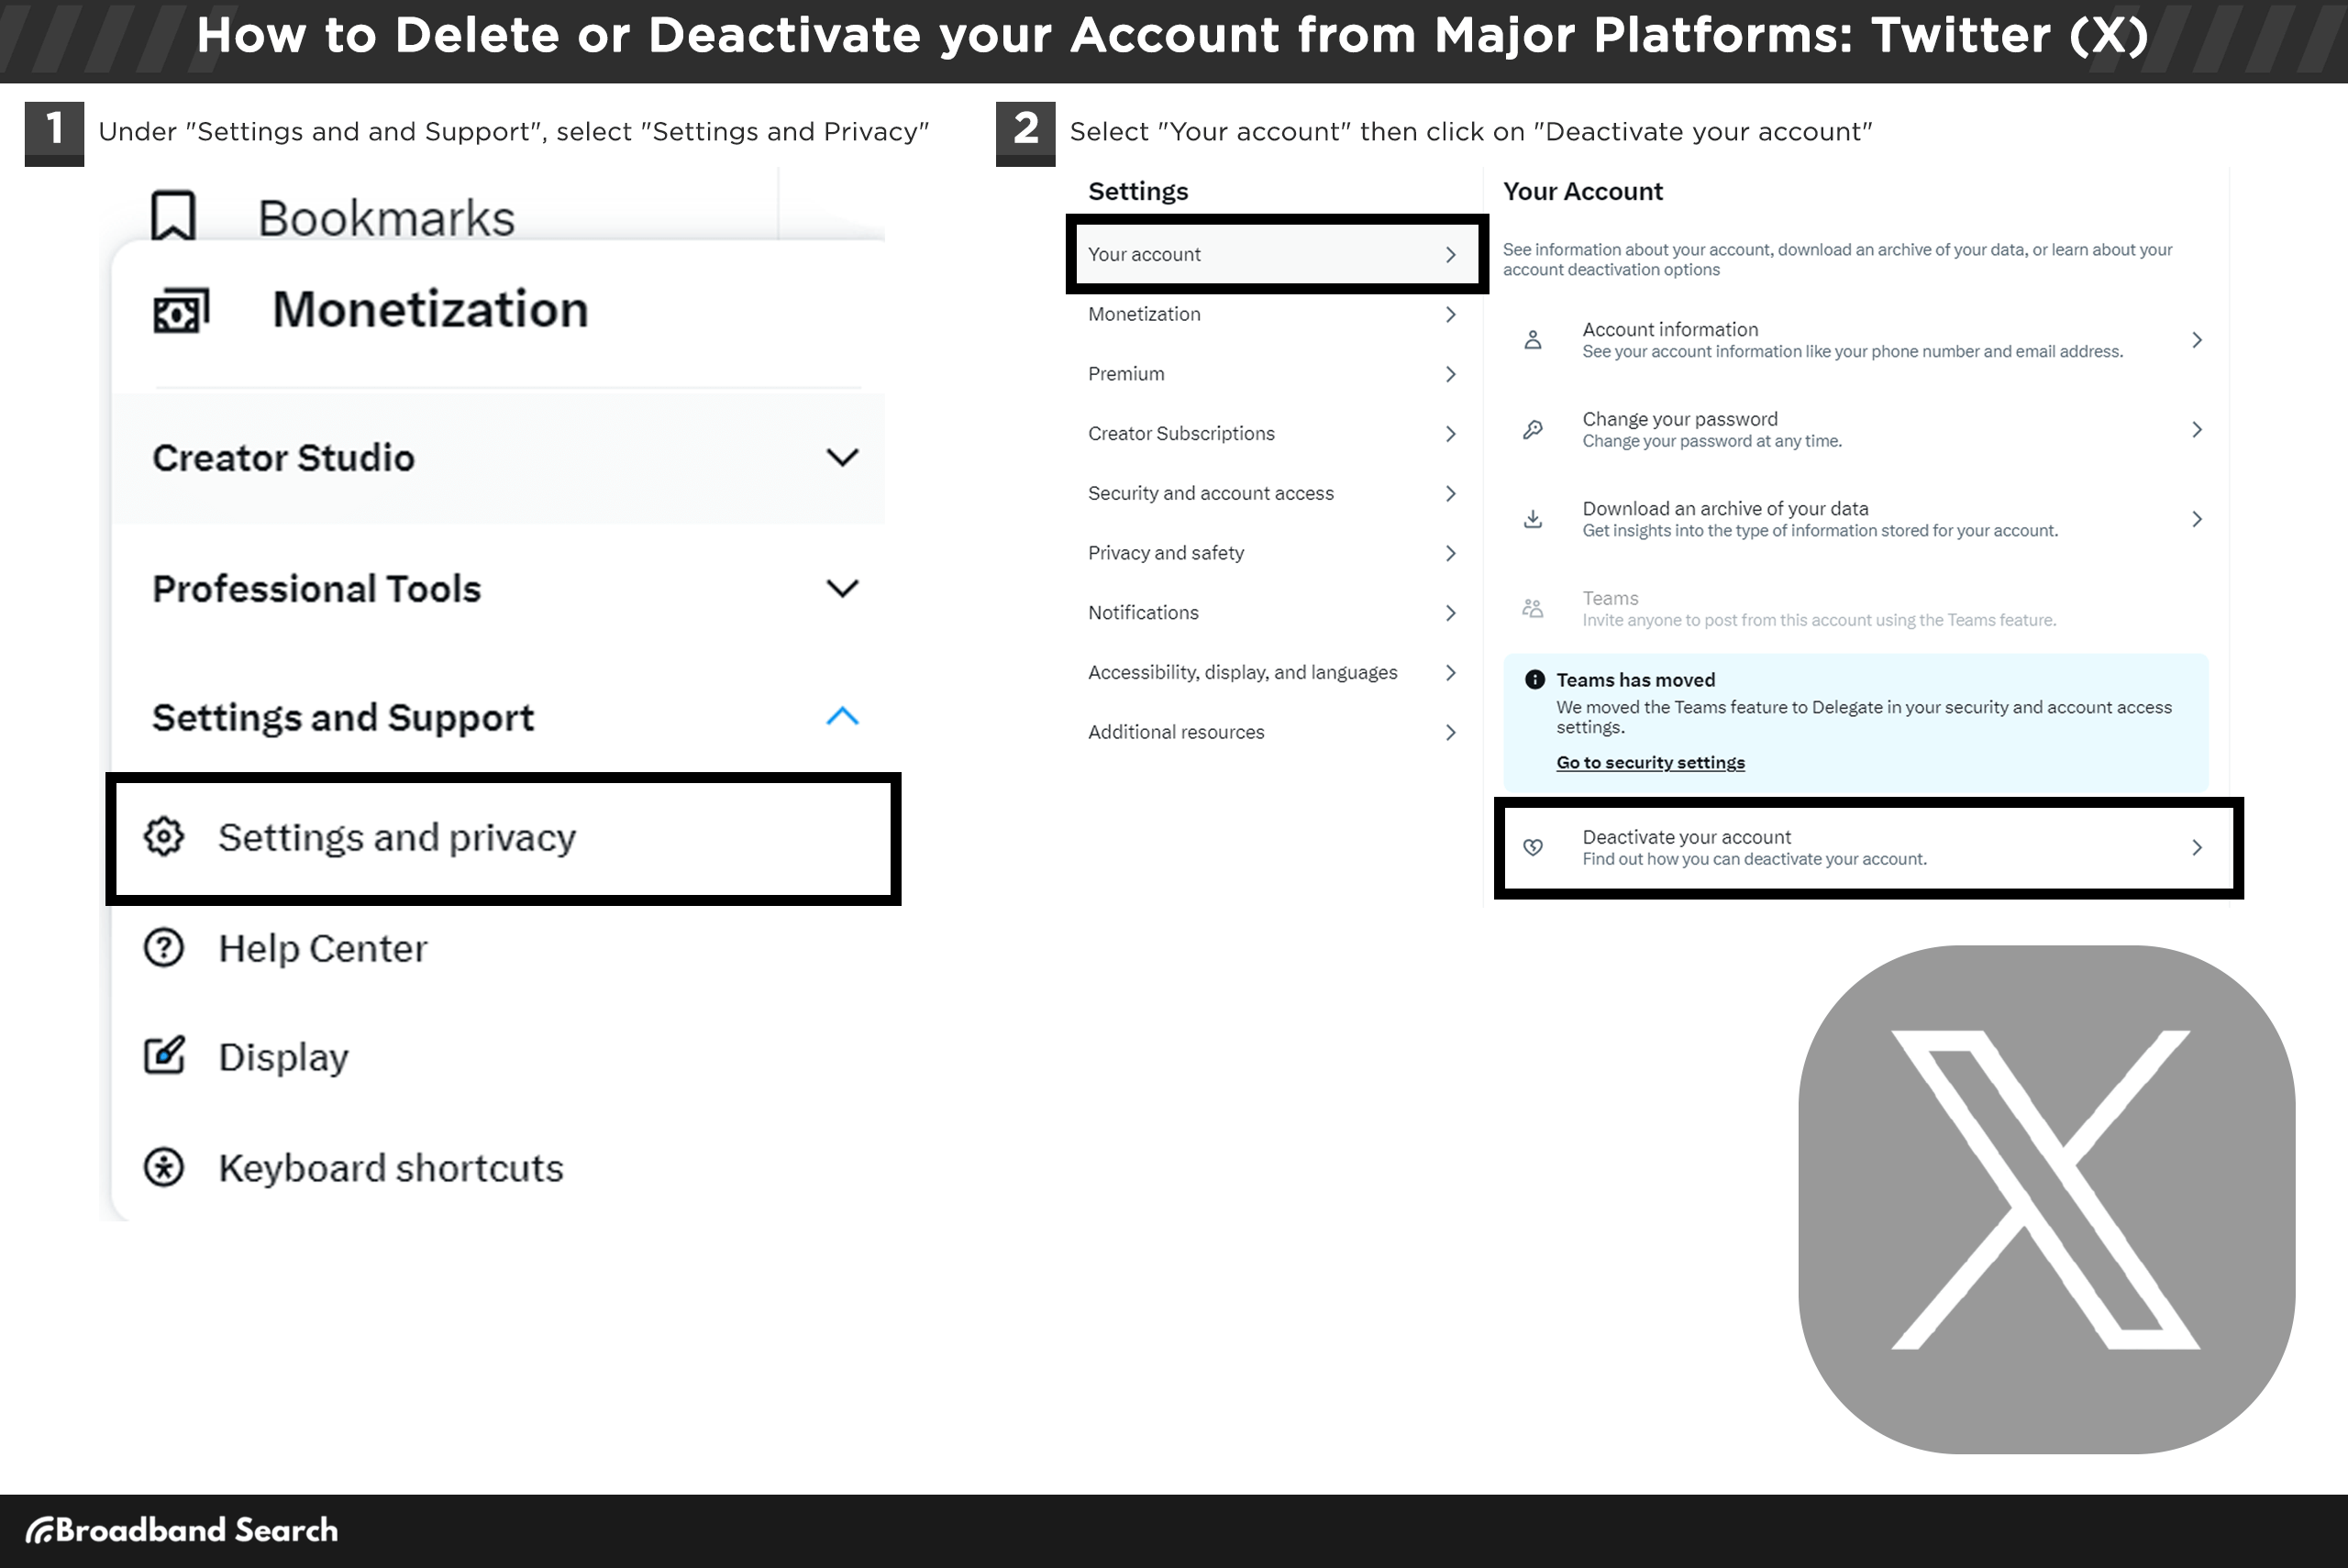 Steps on how to delete or deactivate your account from major platforms like X, previously known as twitter